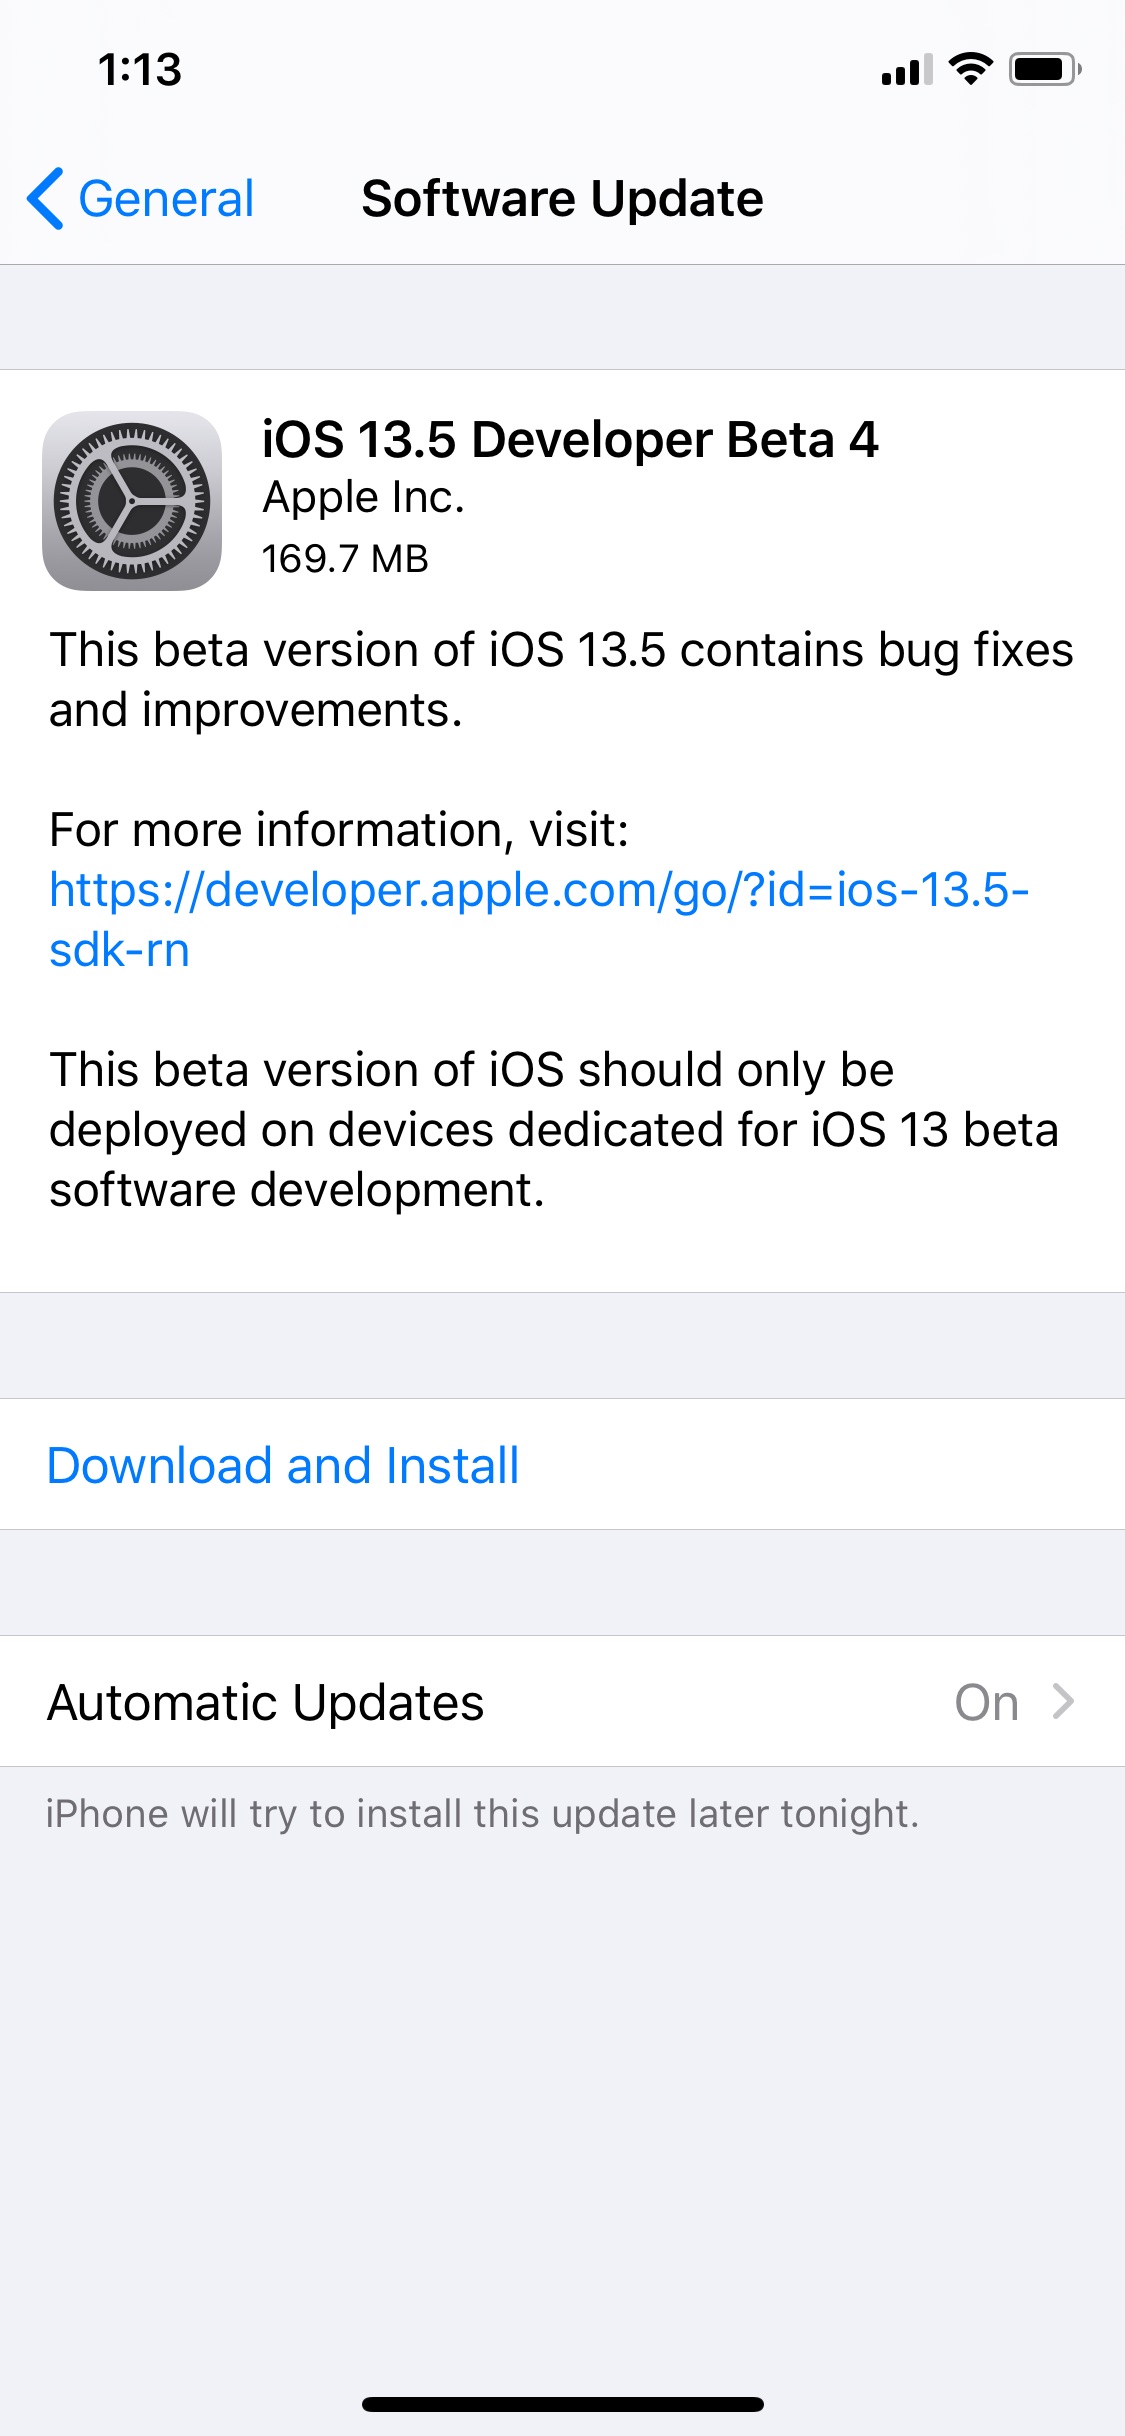 Apple Releases iOS 13.5 Beta 4 and iPadOS 13.5 Beta 4 [Download]